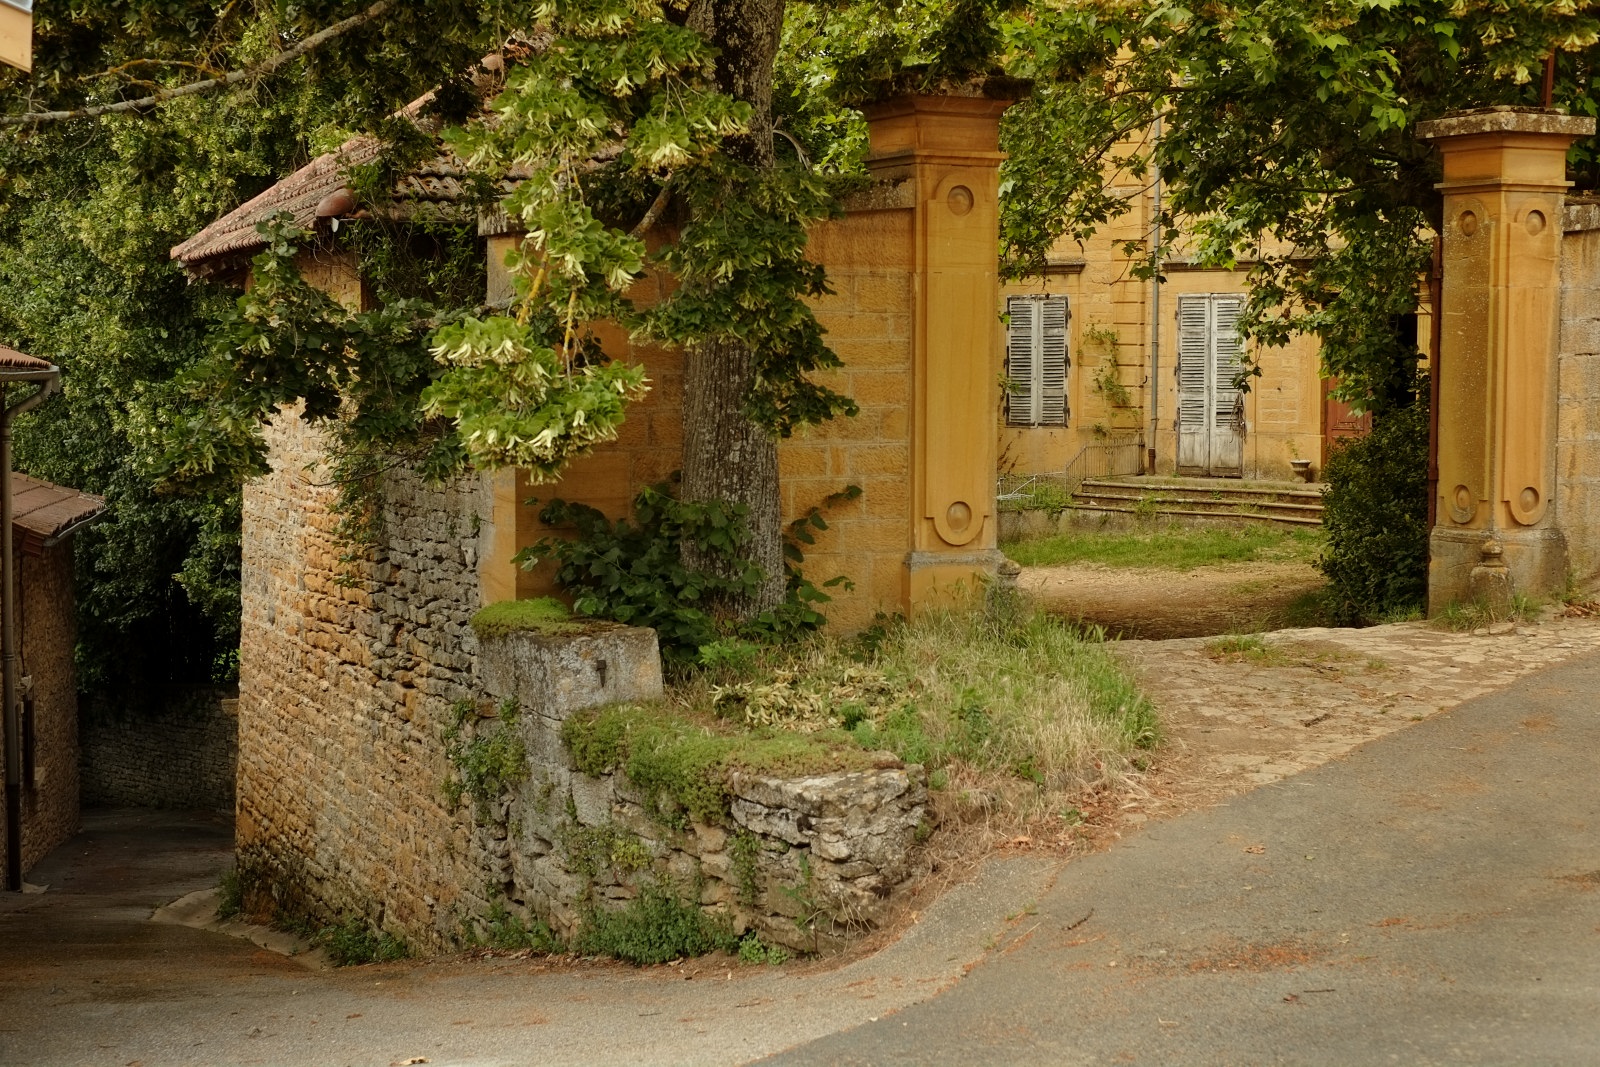 A golden stone gateway and Maison, Bagnols, France. Travel and architectural photography by Kent Johnson